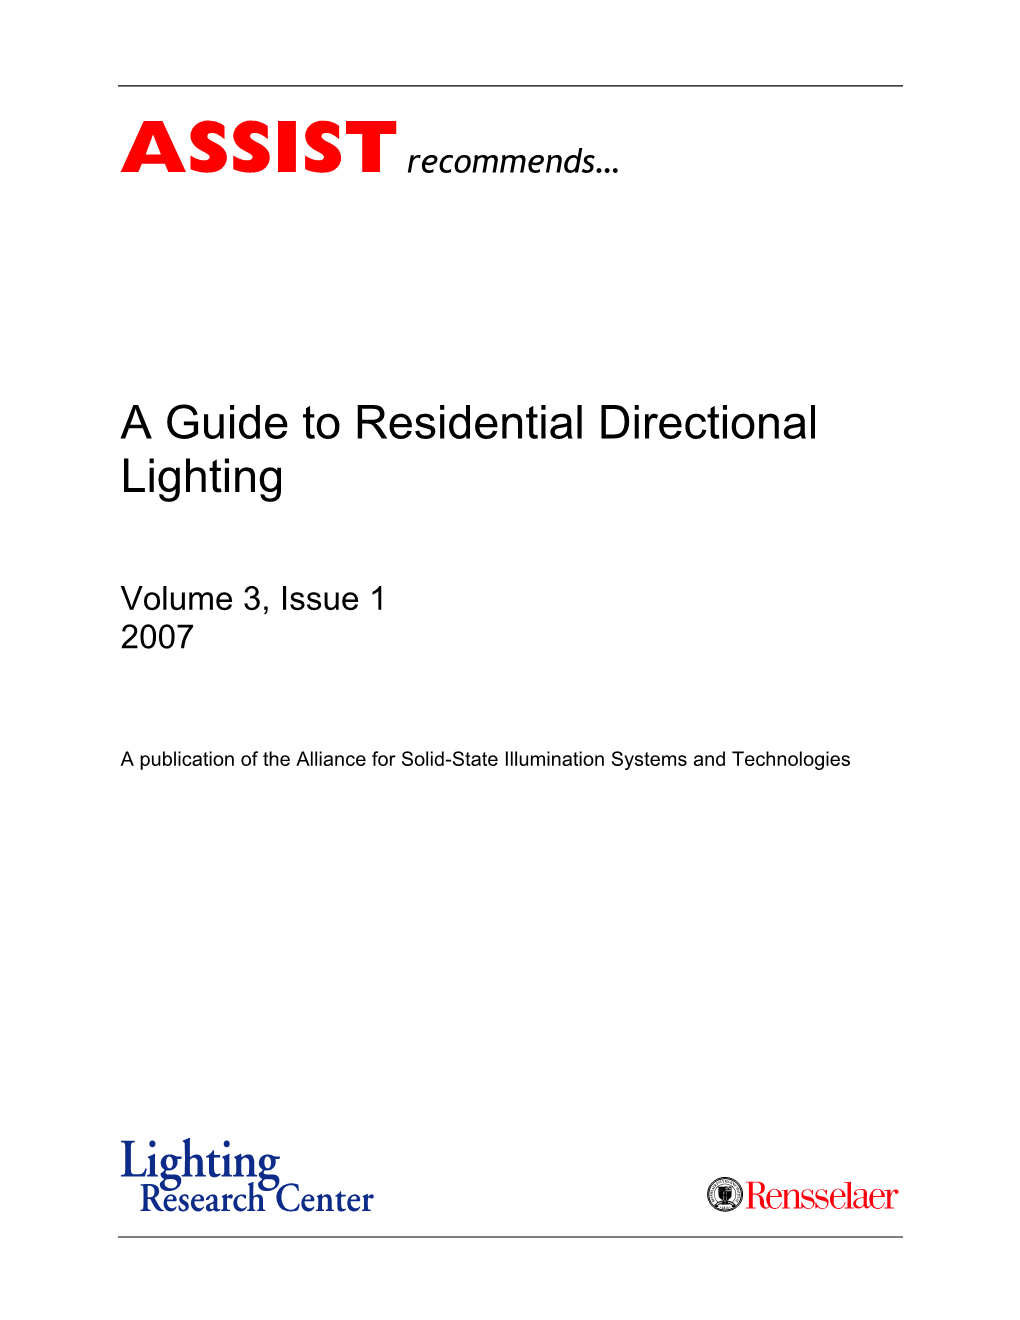 A Guide to Residential Directional Lighting